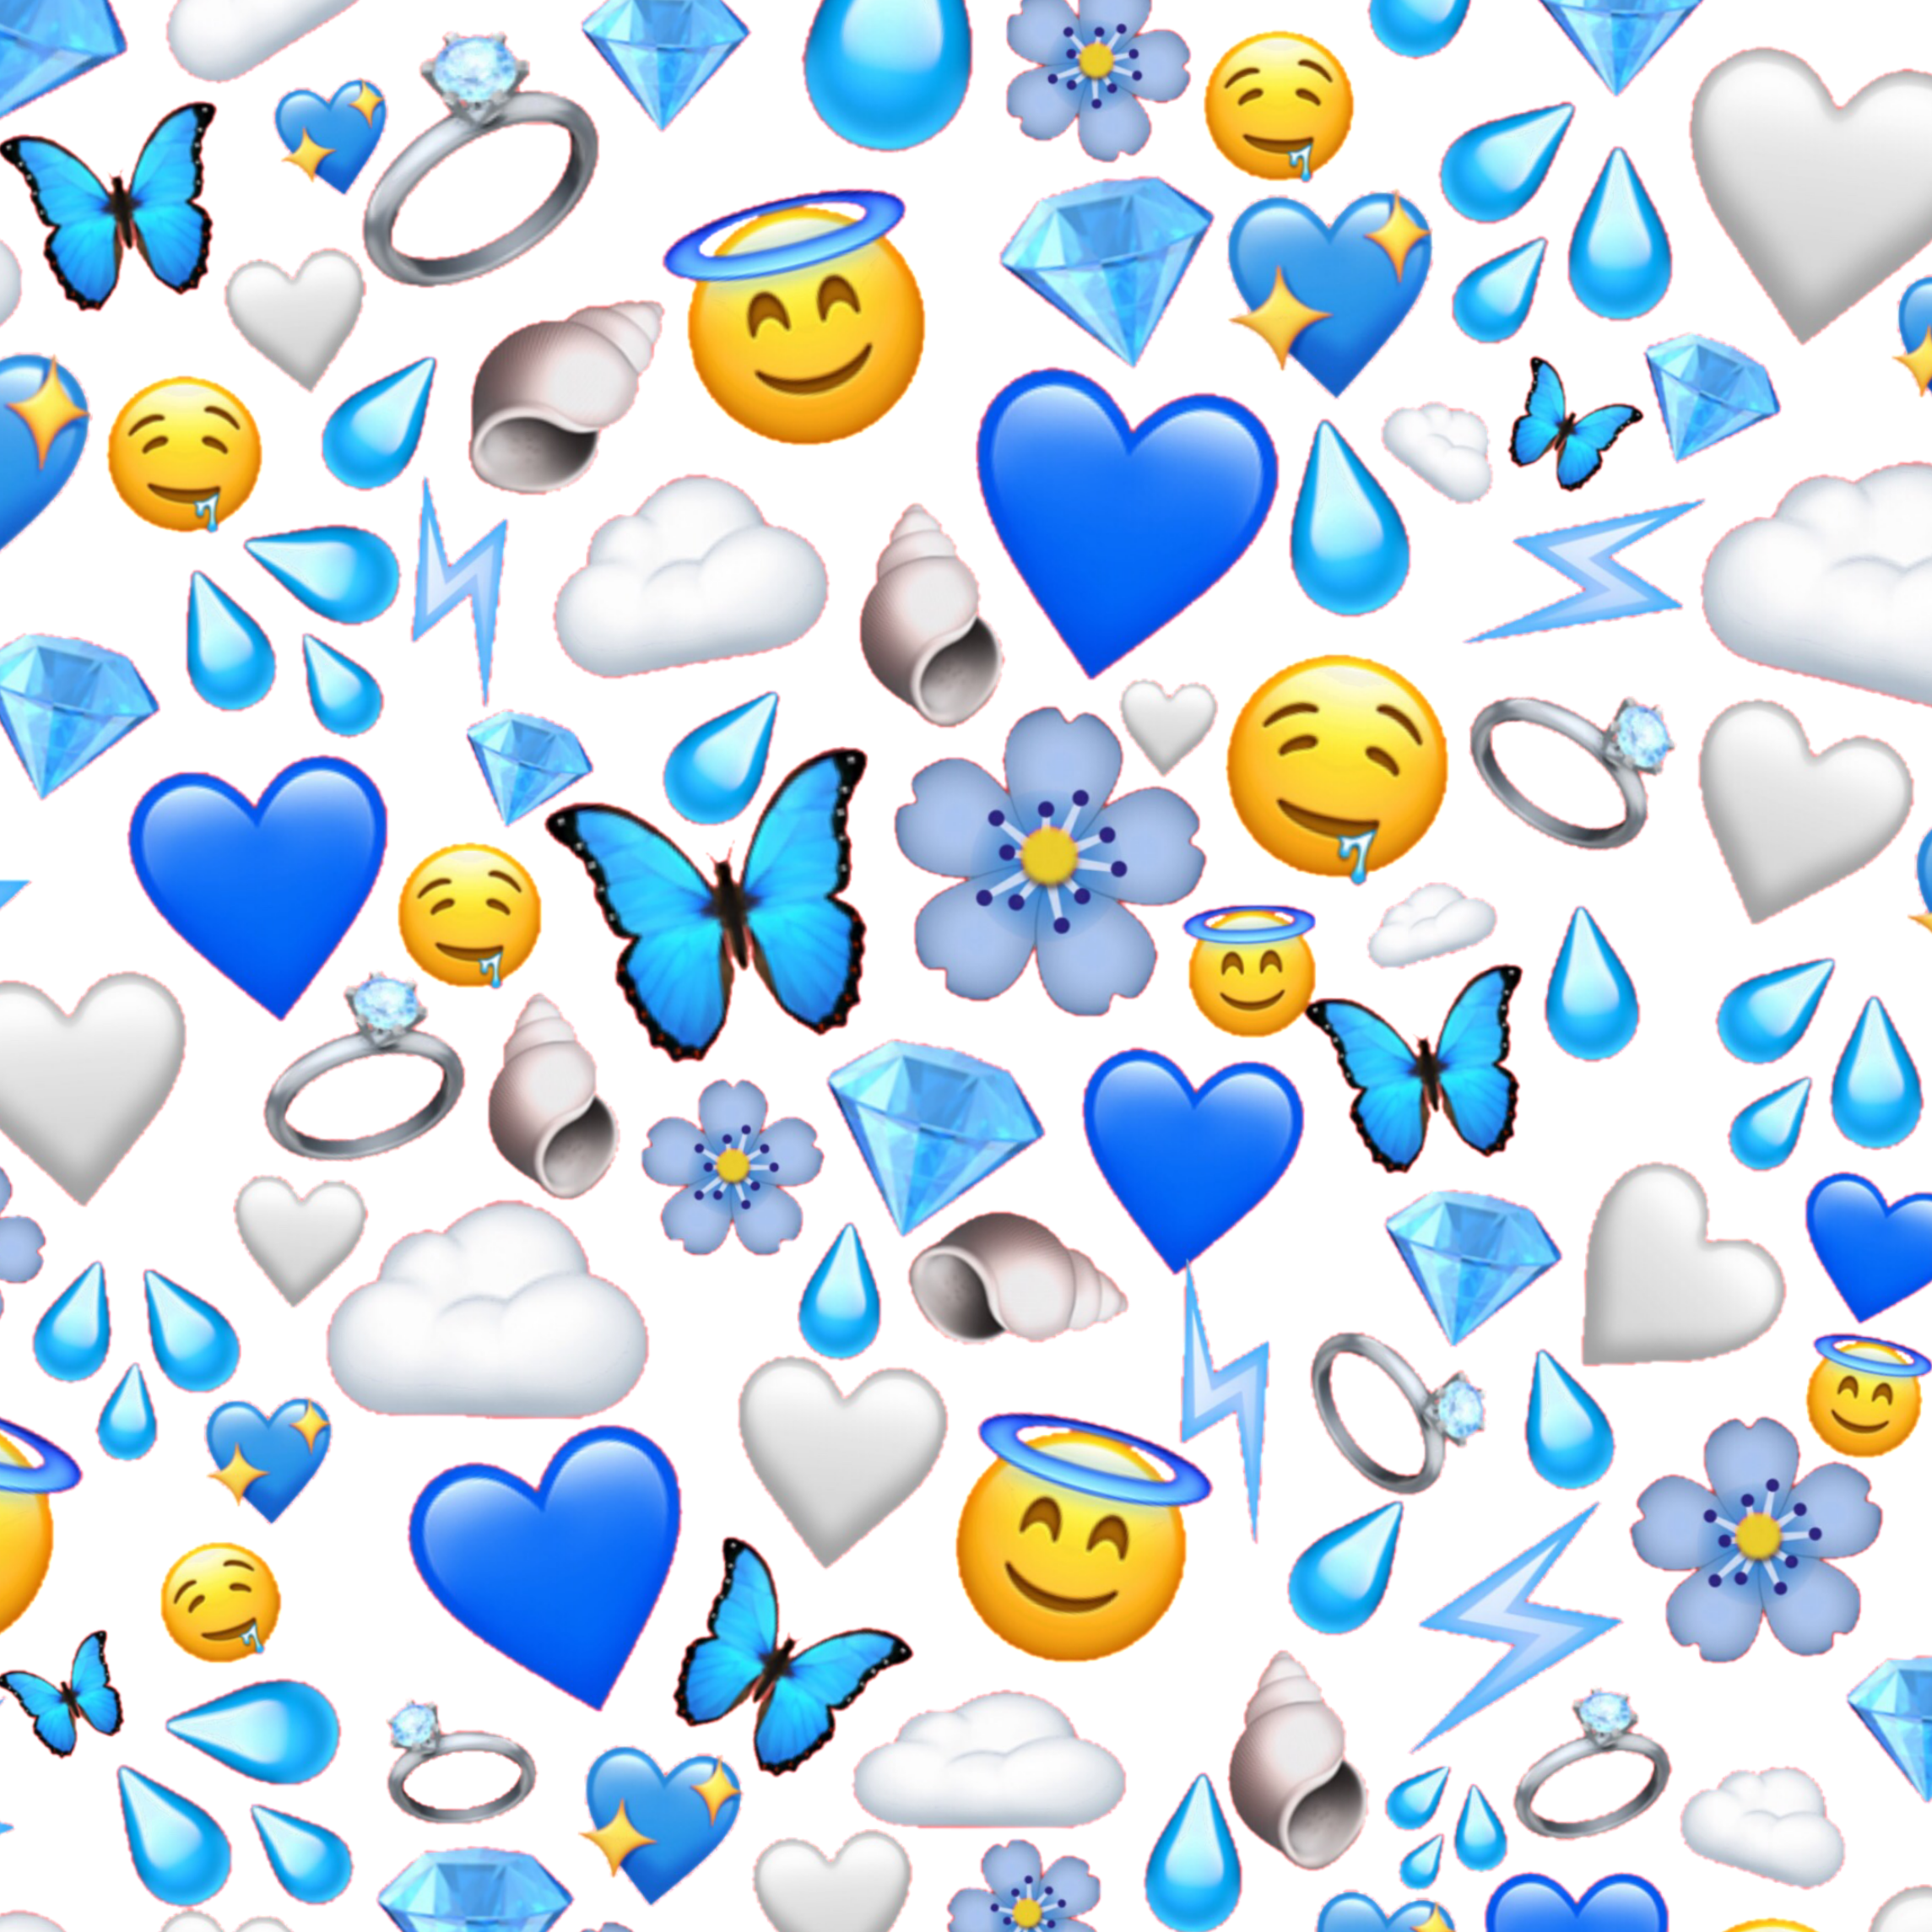 Emoji Smiley Round Cute Watercolor Blue Background Wallpaper Image For Free  Download  Pngtree